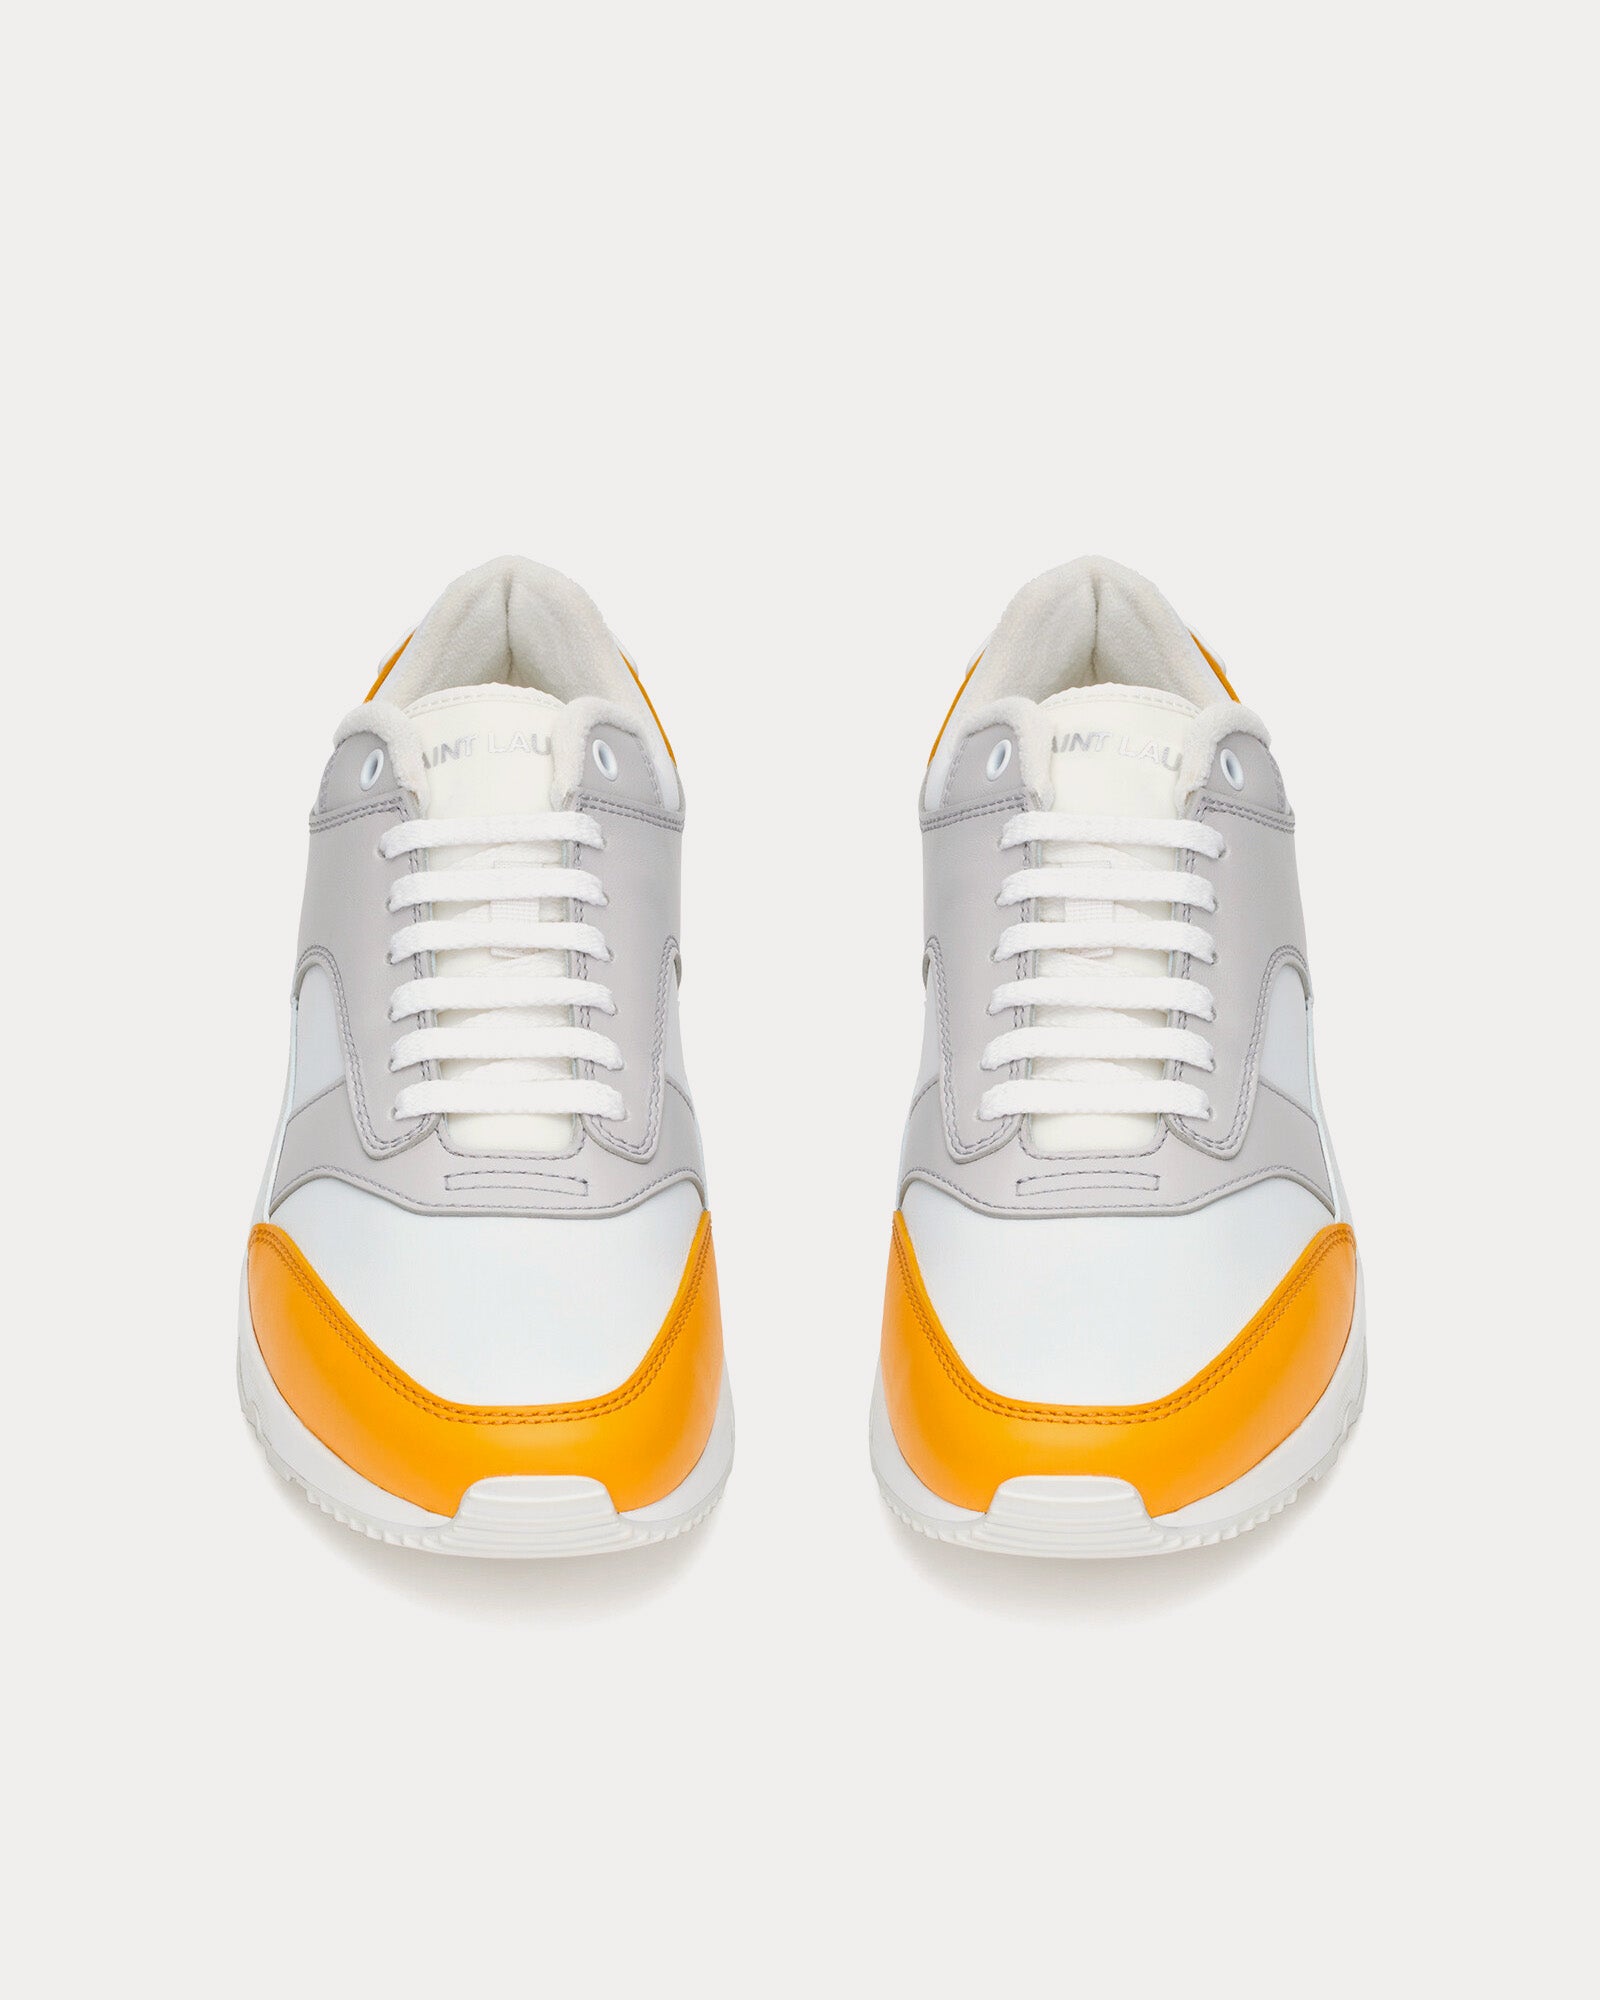 Saint Laurent - Bump Smooth Leather White / Yellow Low Top Sneakers